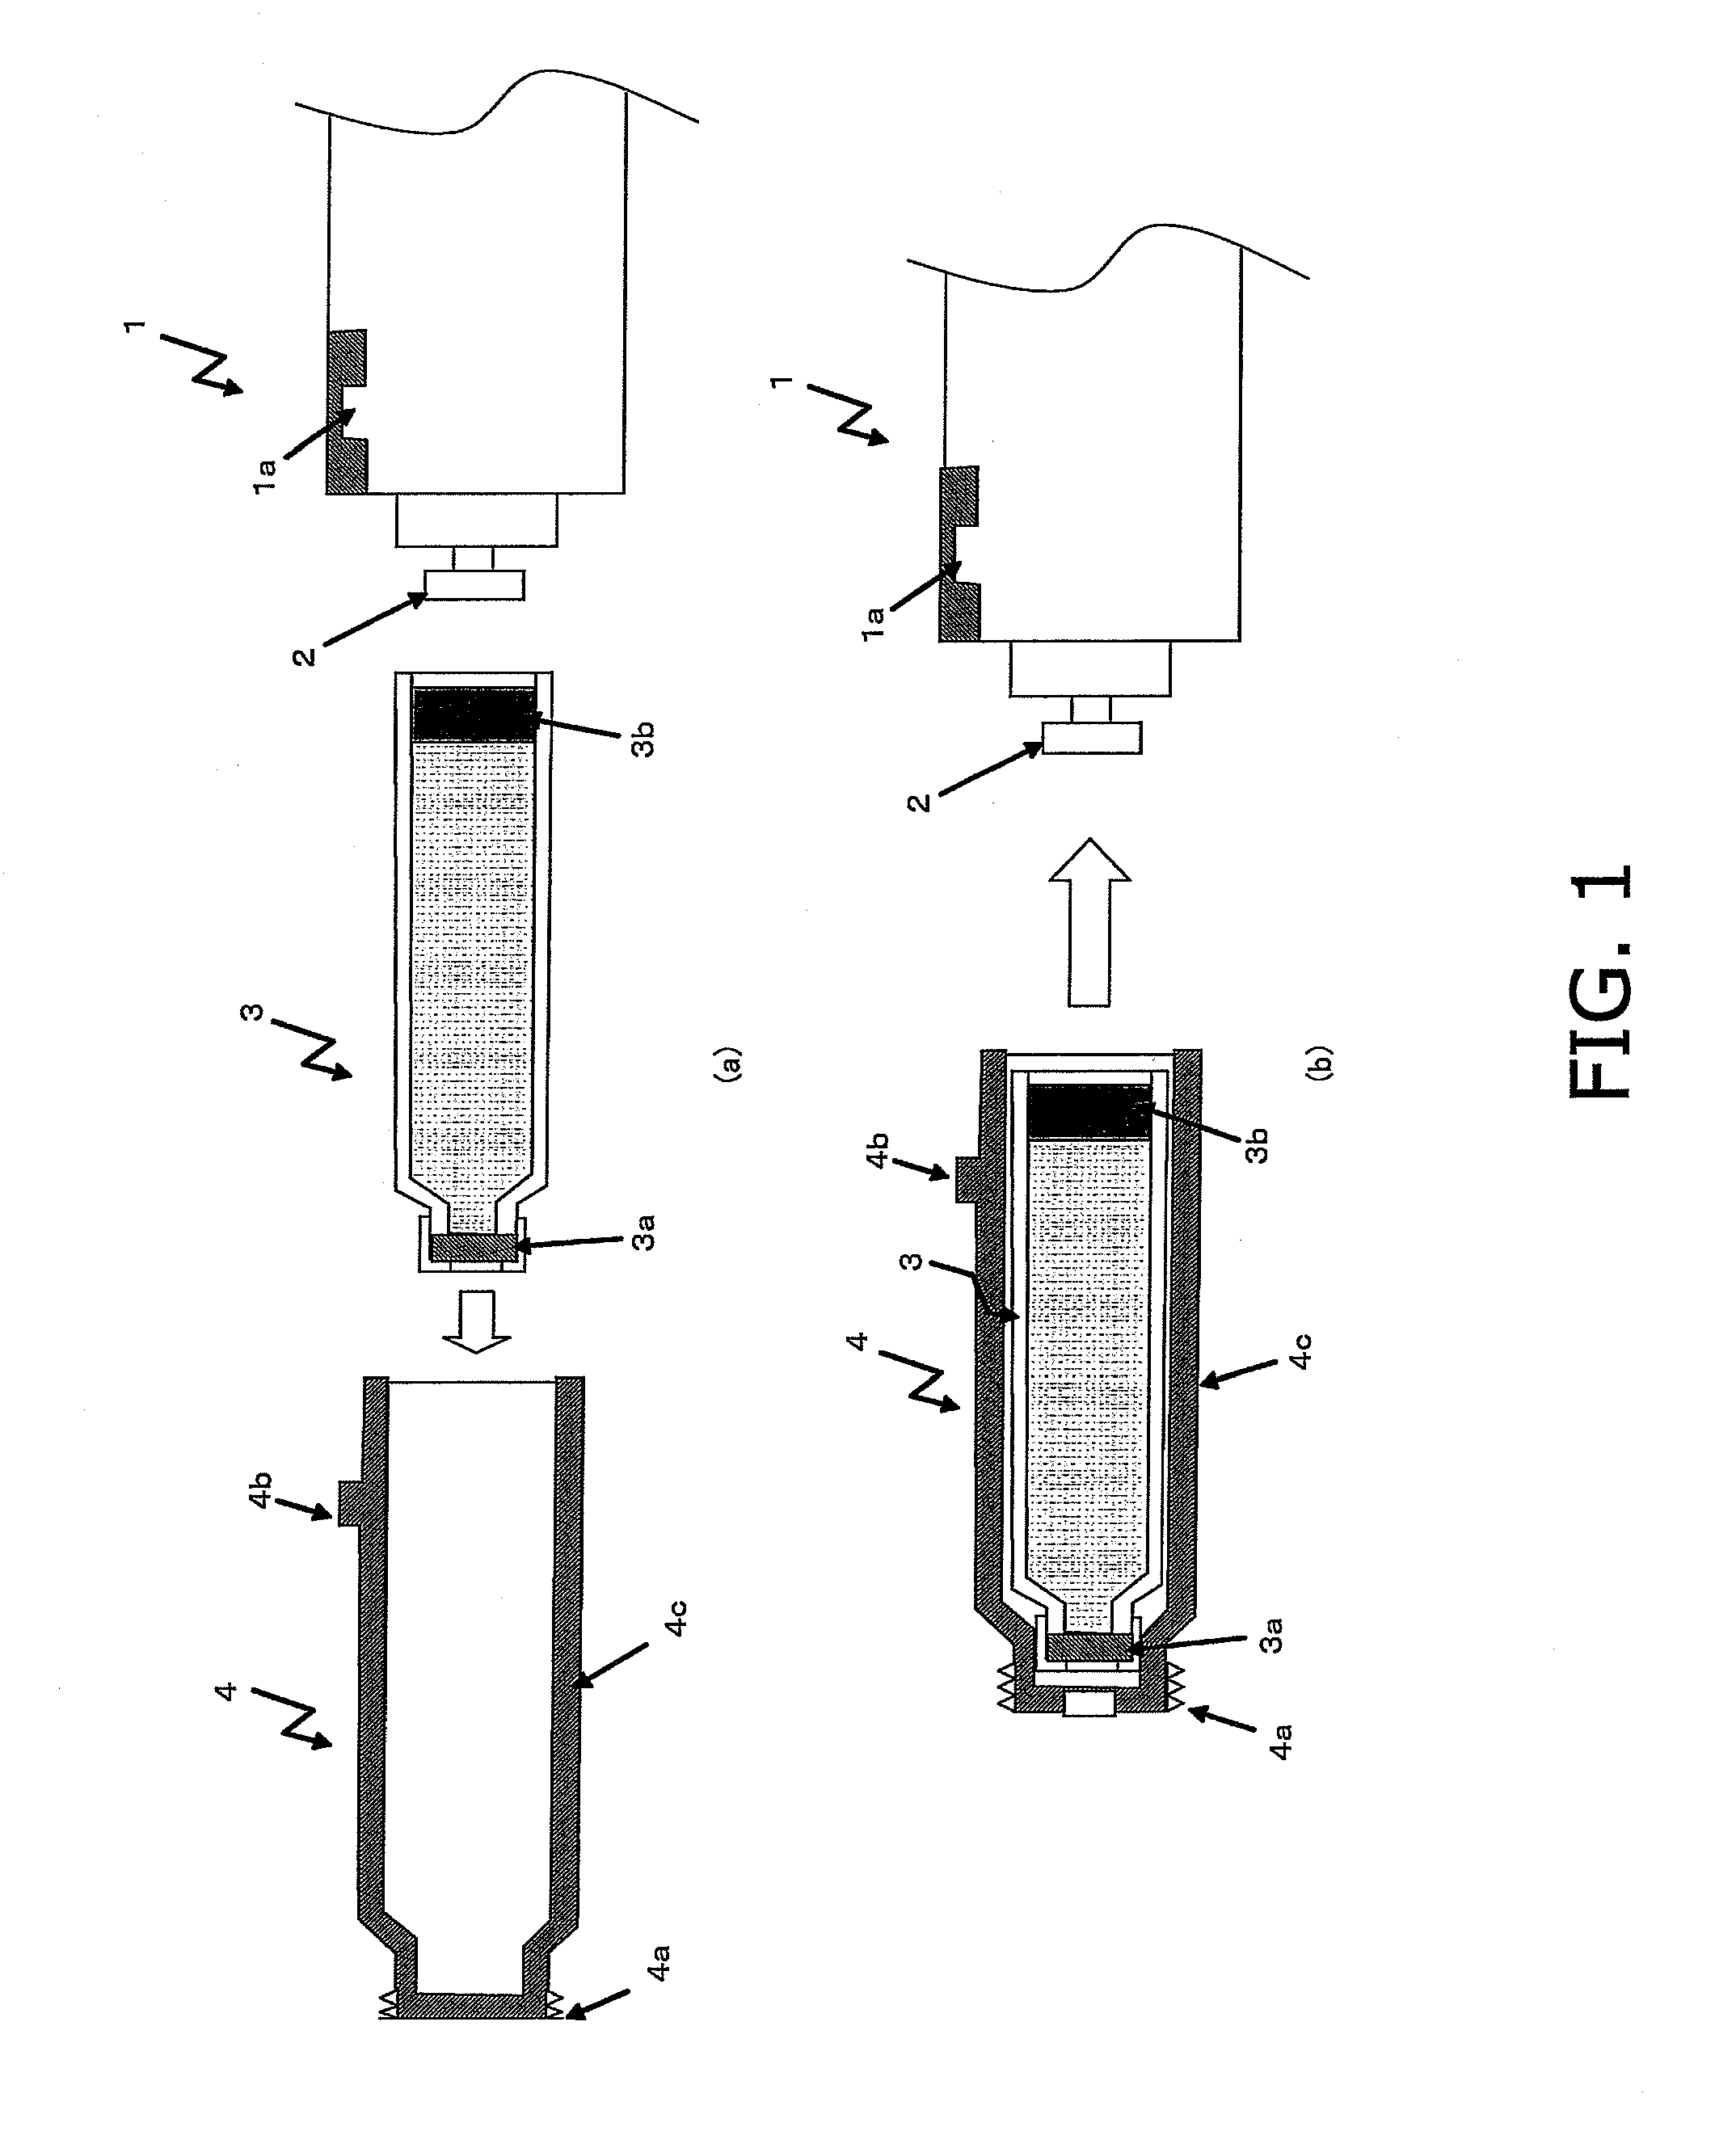 Medication administering device